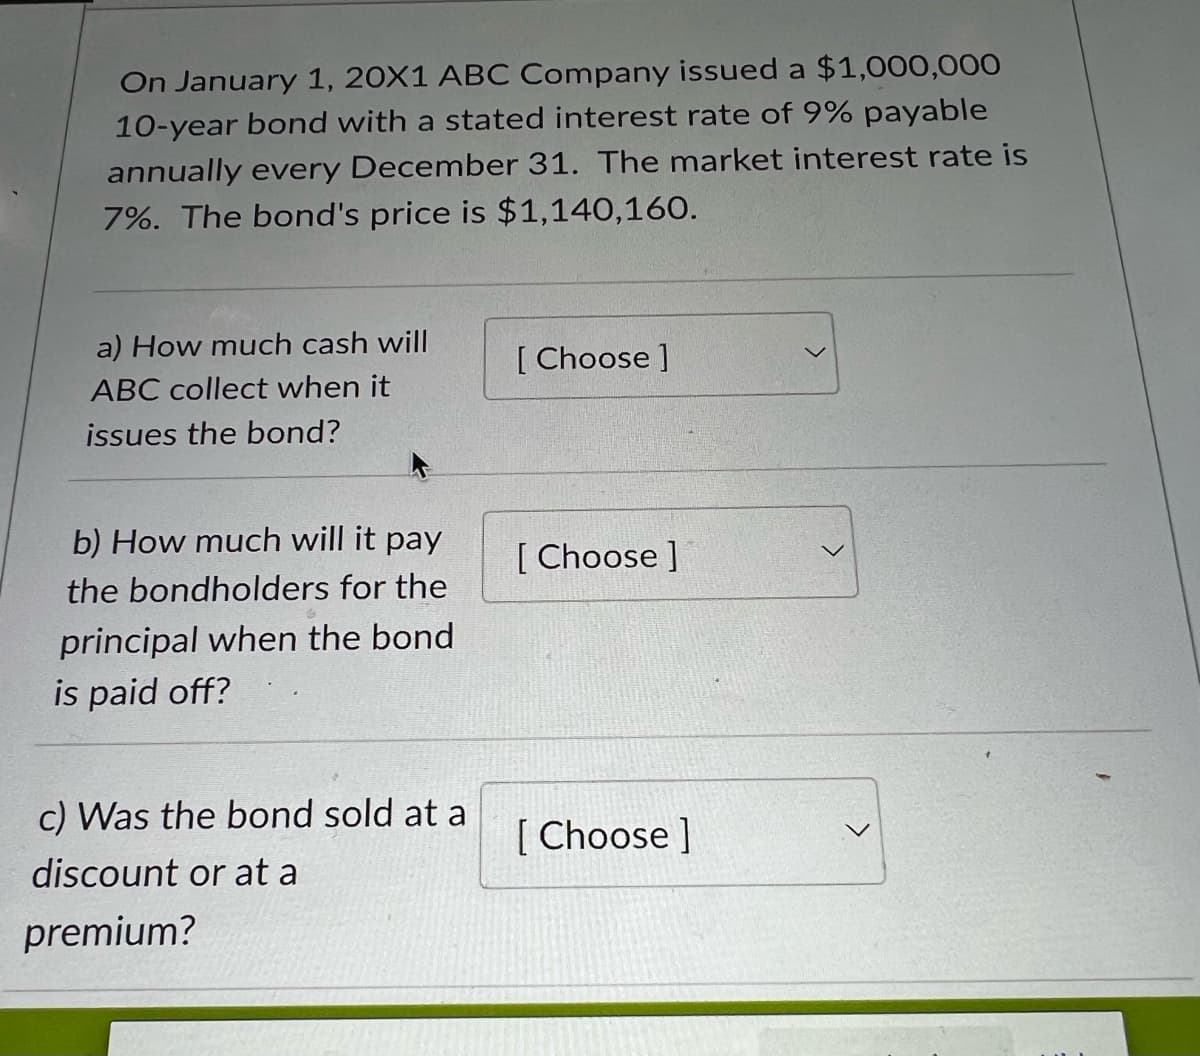 On January 1, 20X1 ABC Company issued a $1,000,000
10-year bond with a stated interest rate of 9% payable
annually every December 31. The market interest rate is
7%. The bond's price is $1,140,160.
a) How much cash will
ABC collect when it
issues the bond?
b) How much will it pay
the bondholders for the
principal when the bond
is paid off?
c) Was the bond sold at a
discount or at a
premium?
[Choose ]
[Choose ]
[Choose ]